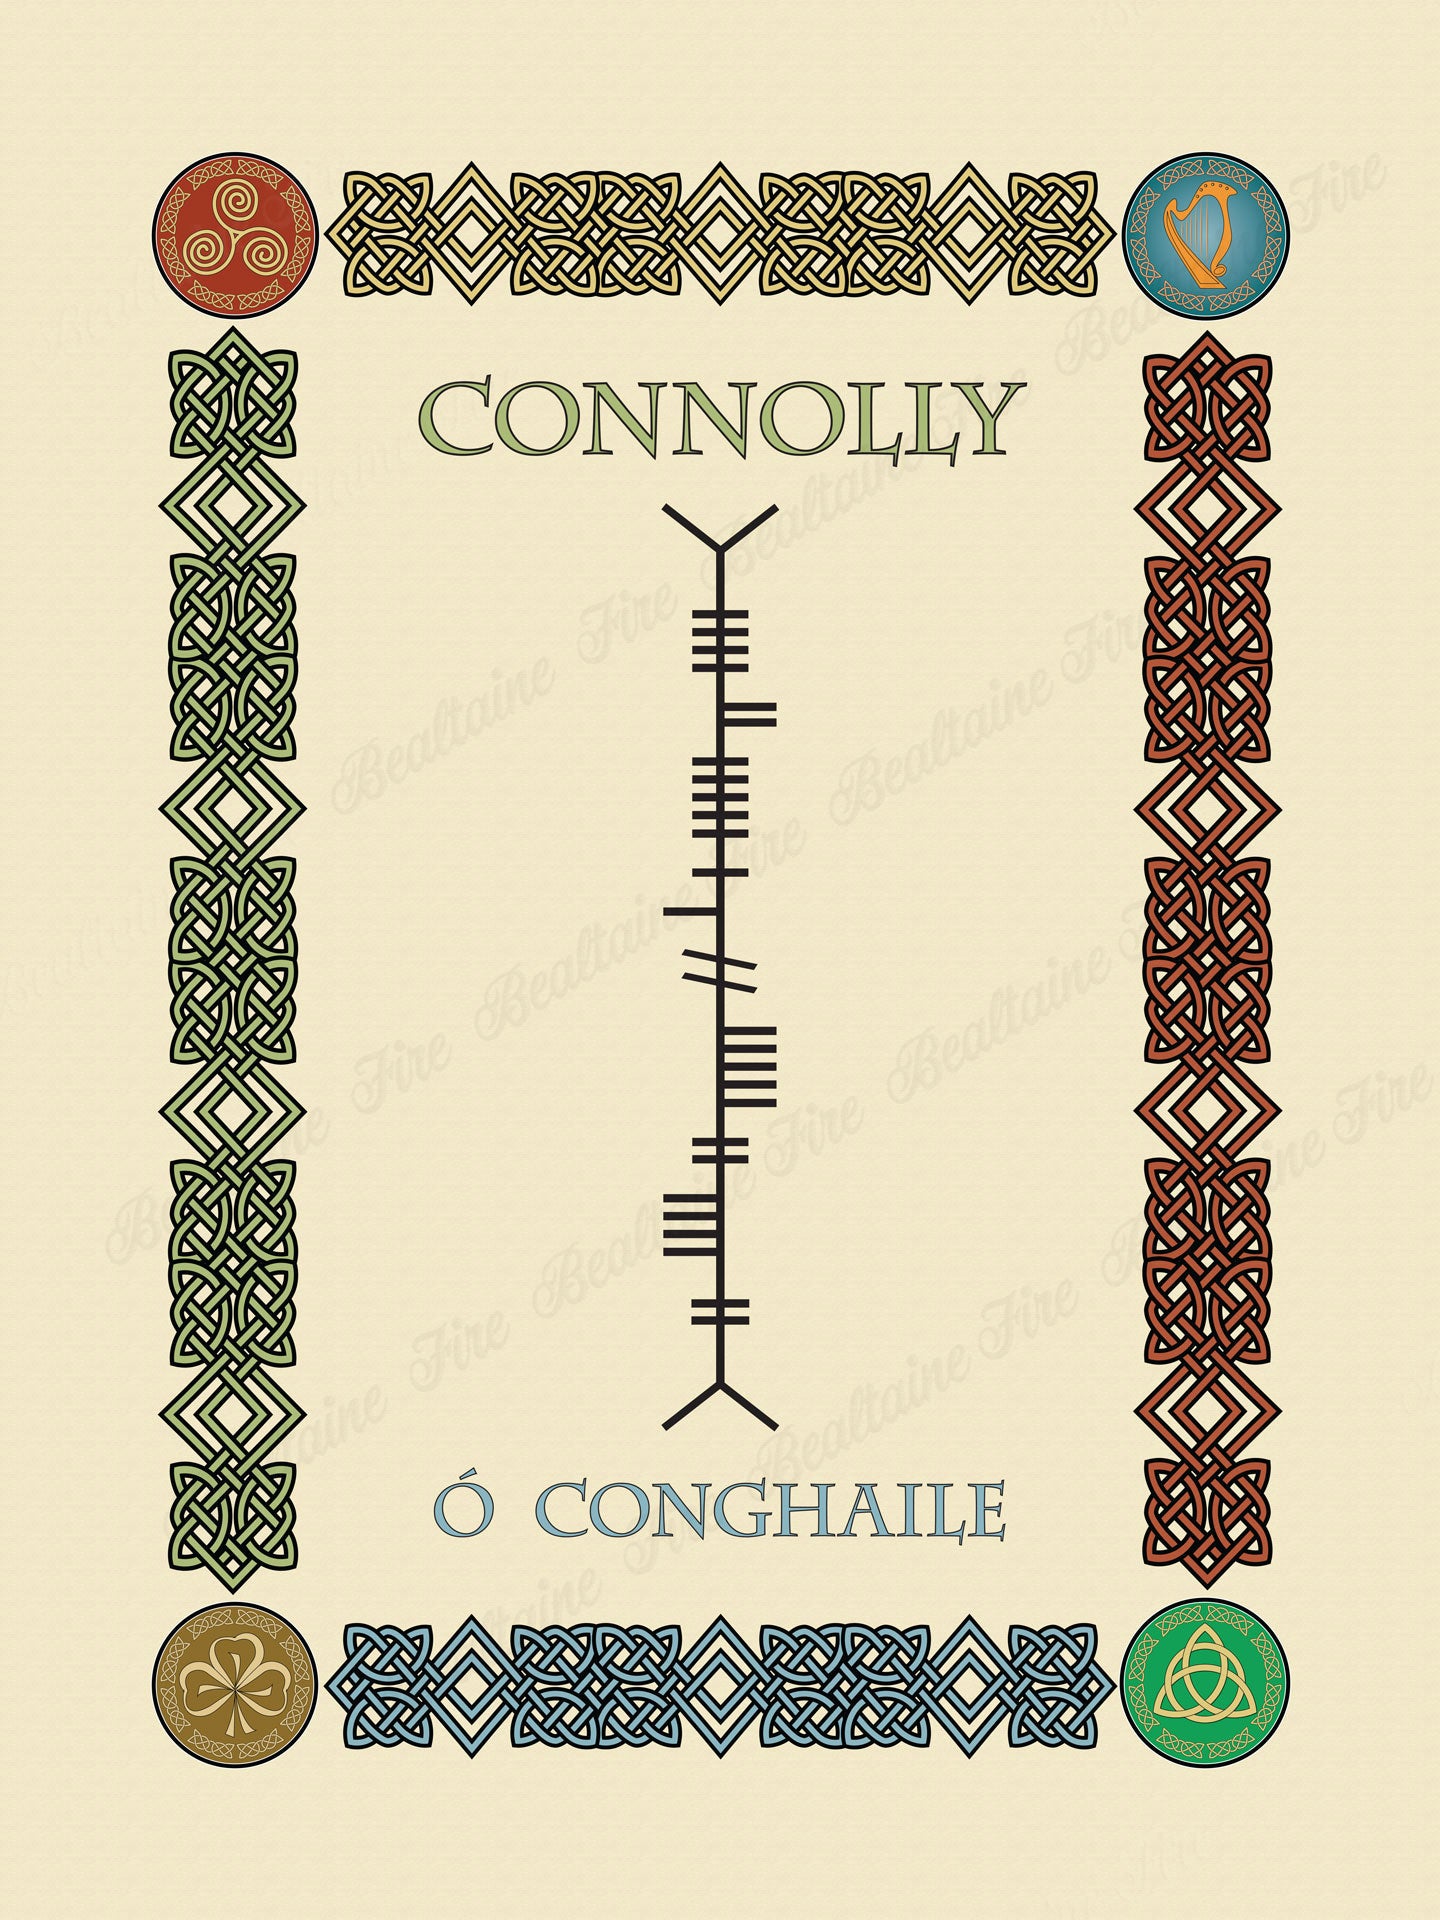 Connolly in Old Irish and Ogham - Premium luster unframed print